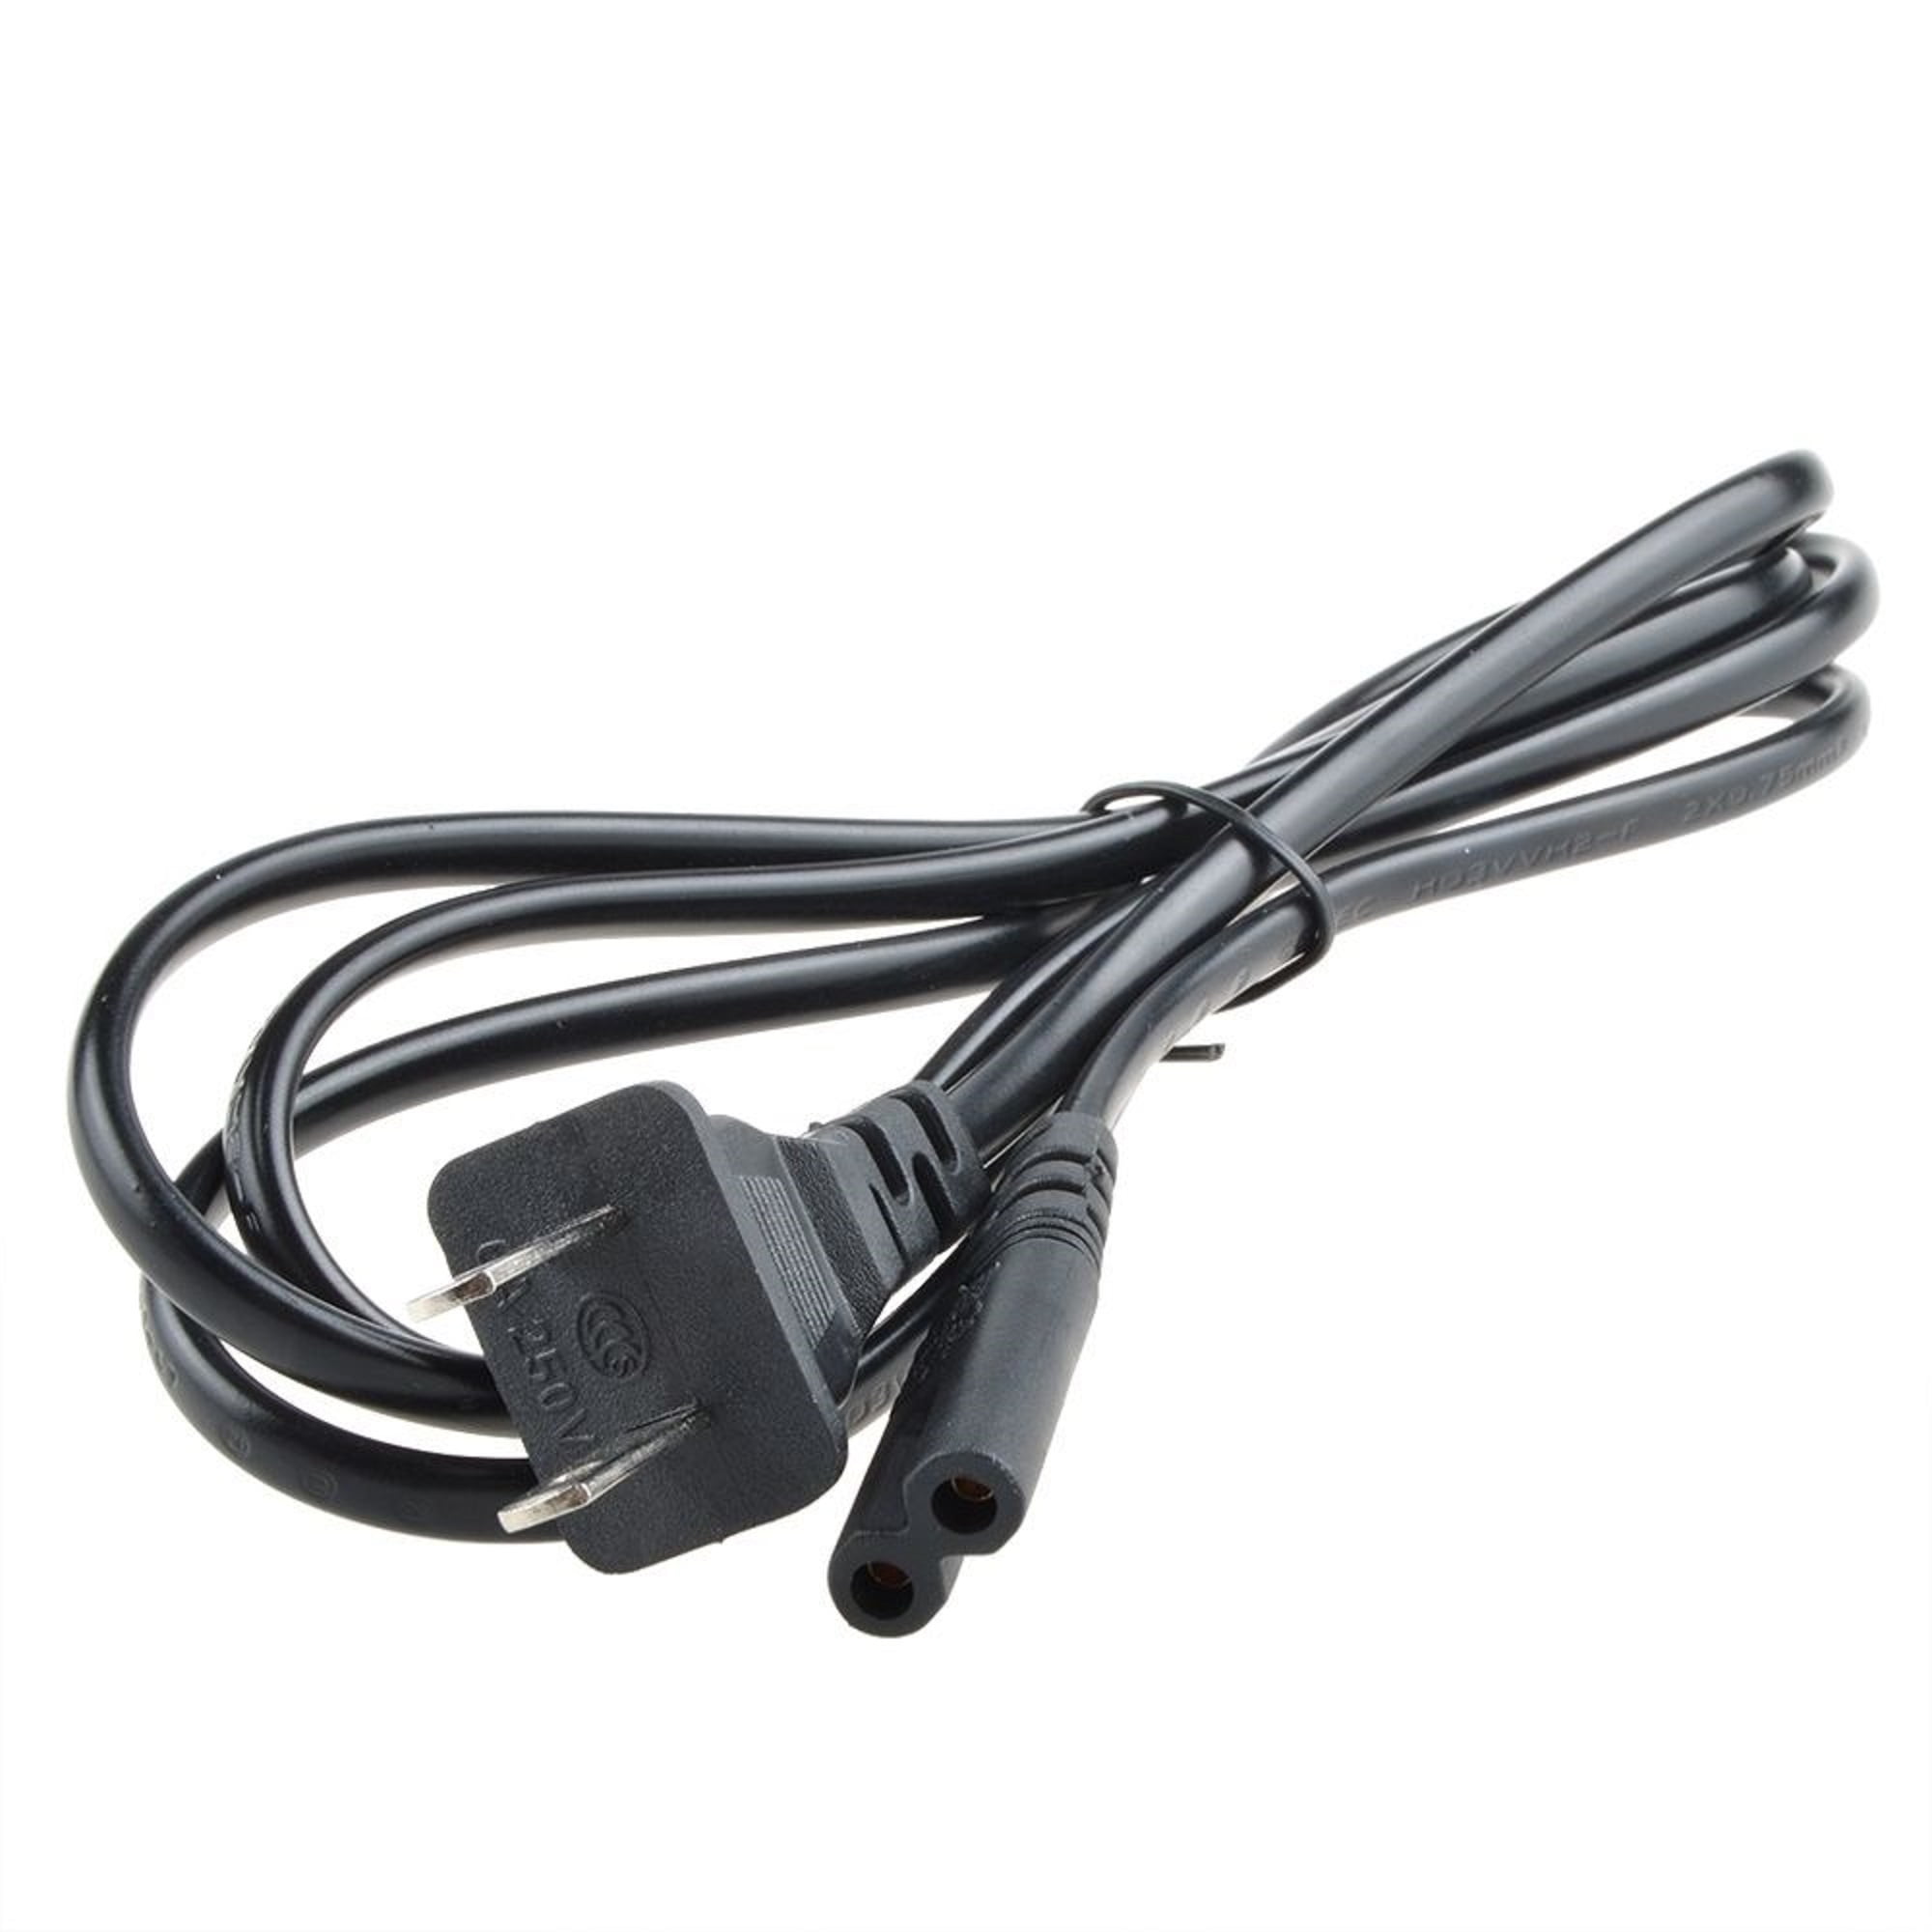 POWER CABLE Cord for SAMSUNG HT-FM53 HT-HM55 HT-H4500 HT-H5500W HT-H6500WM PSU 